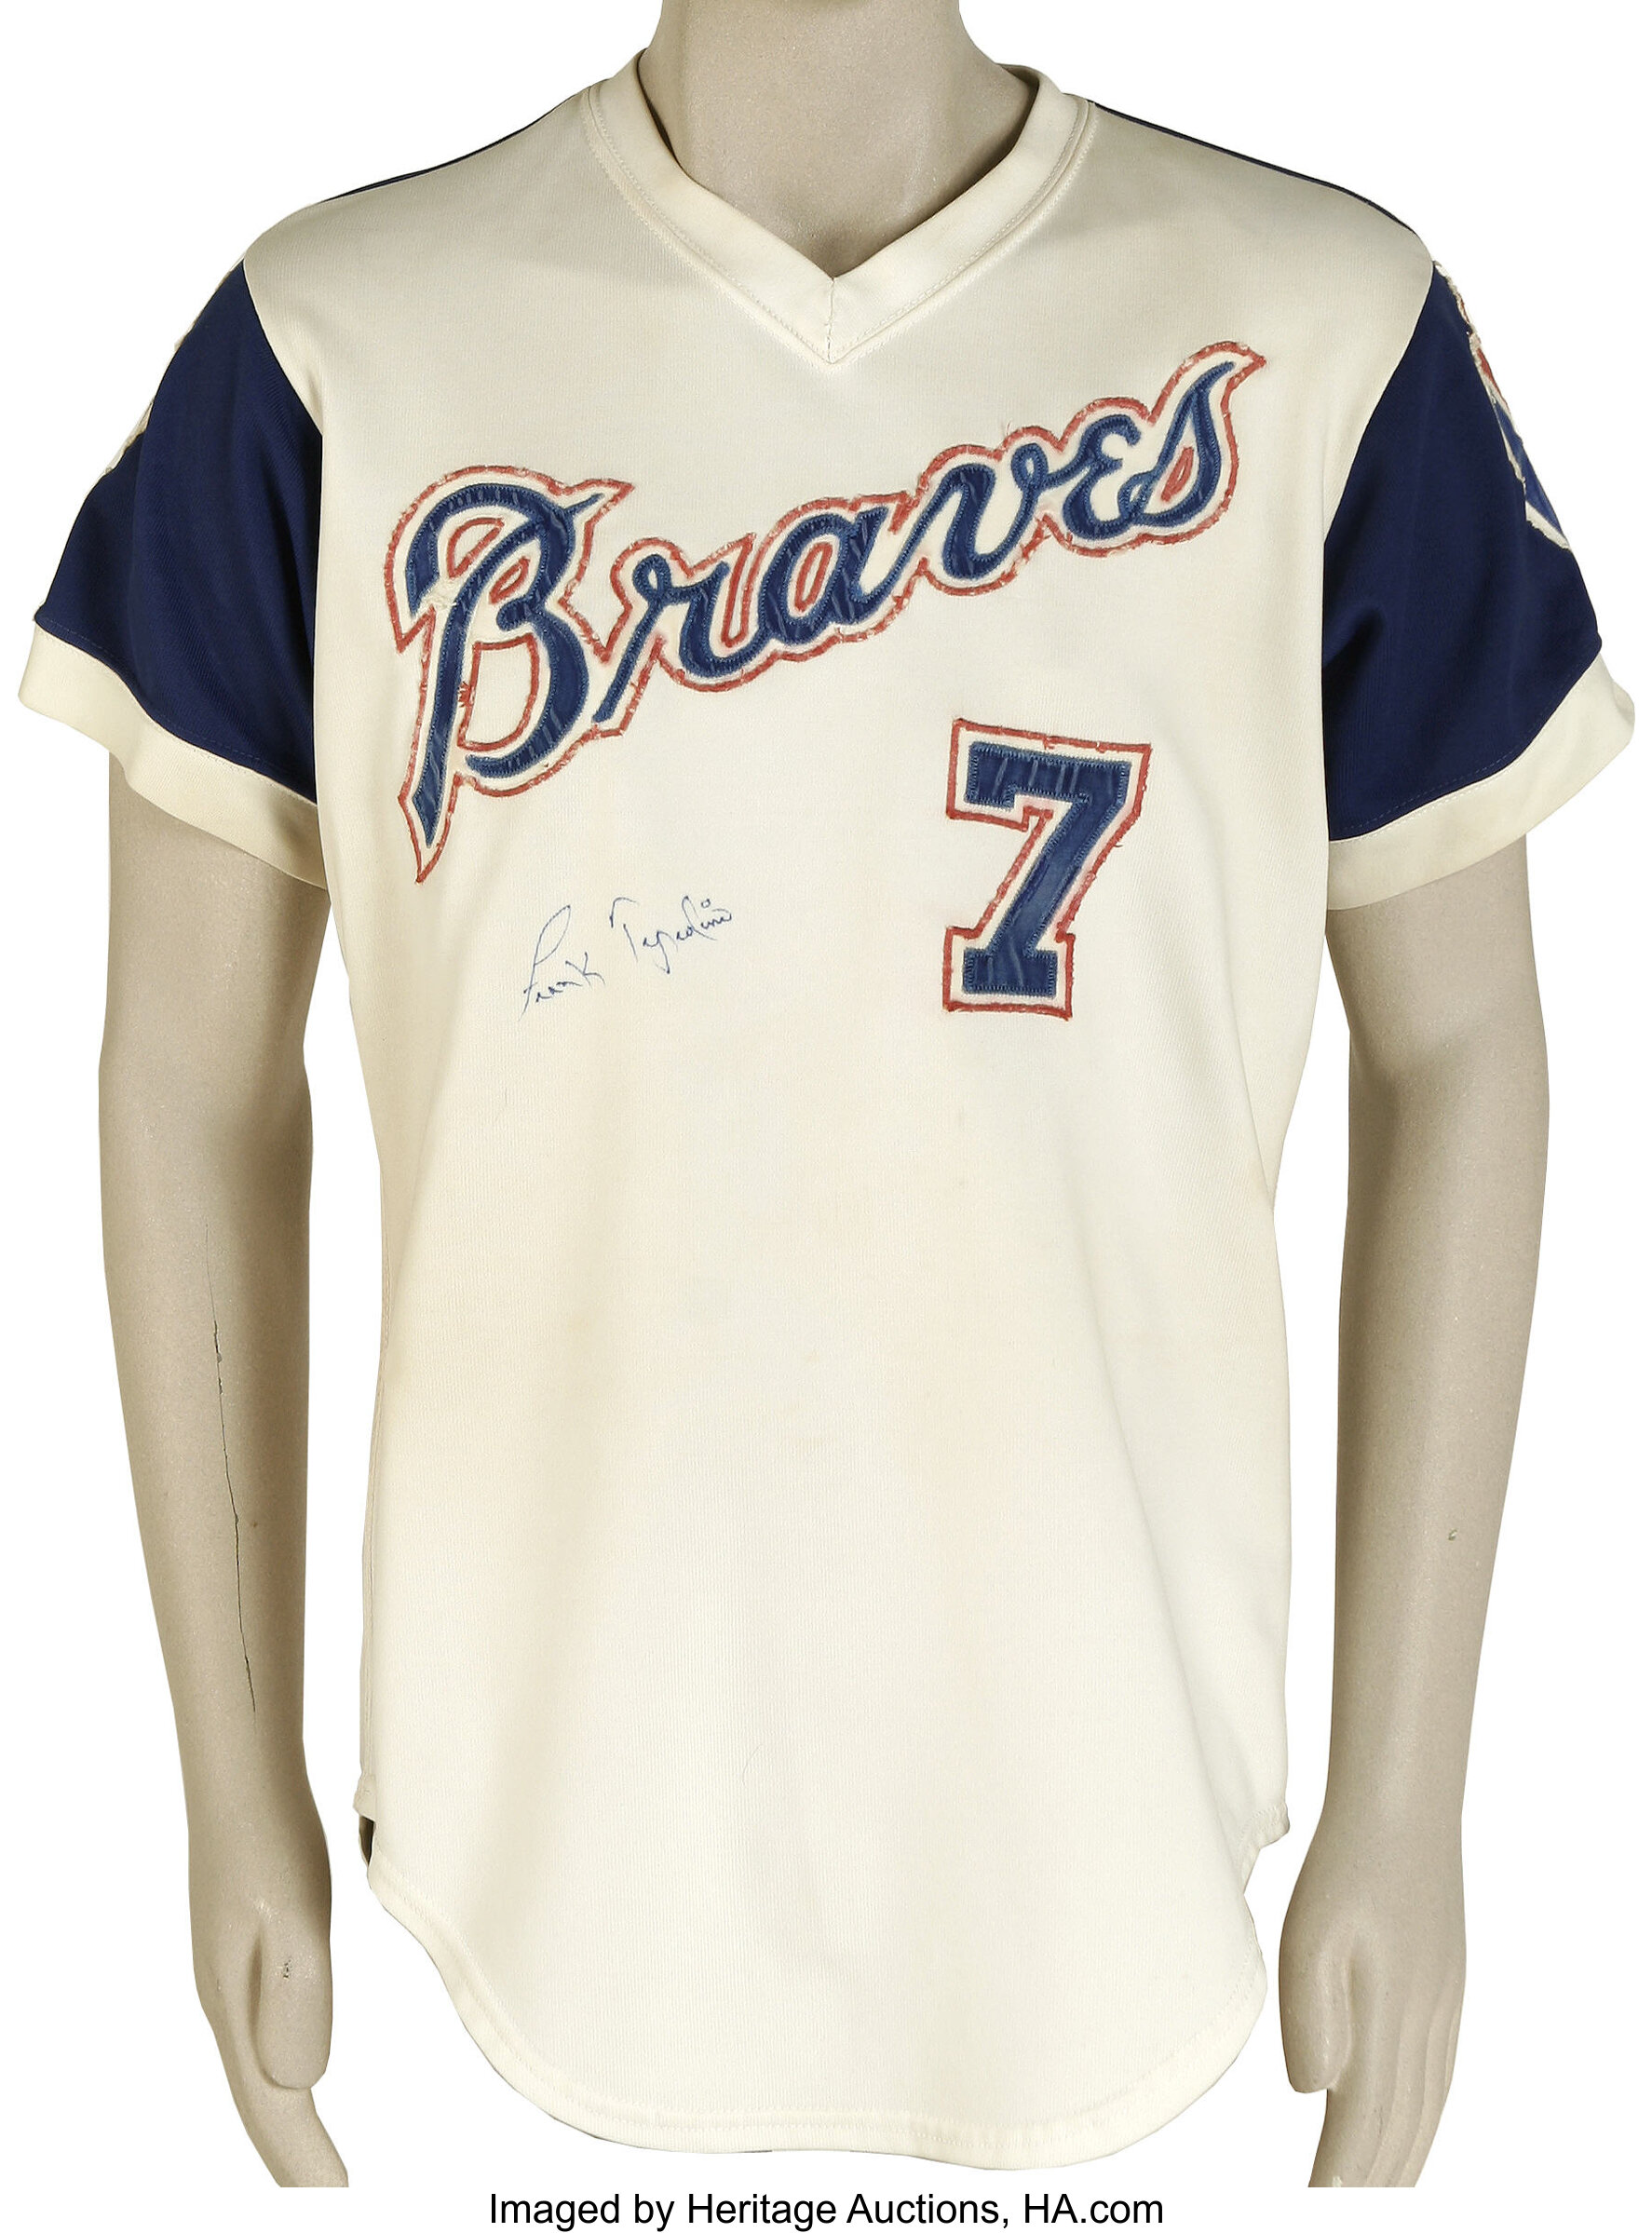 See which throwback uniform the Braves will wear Sunday